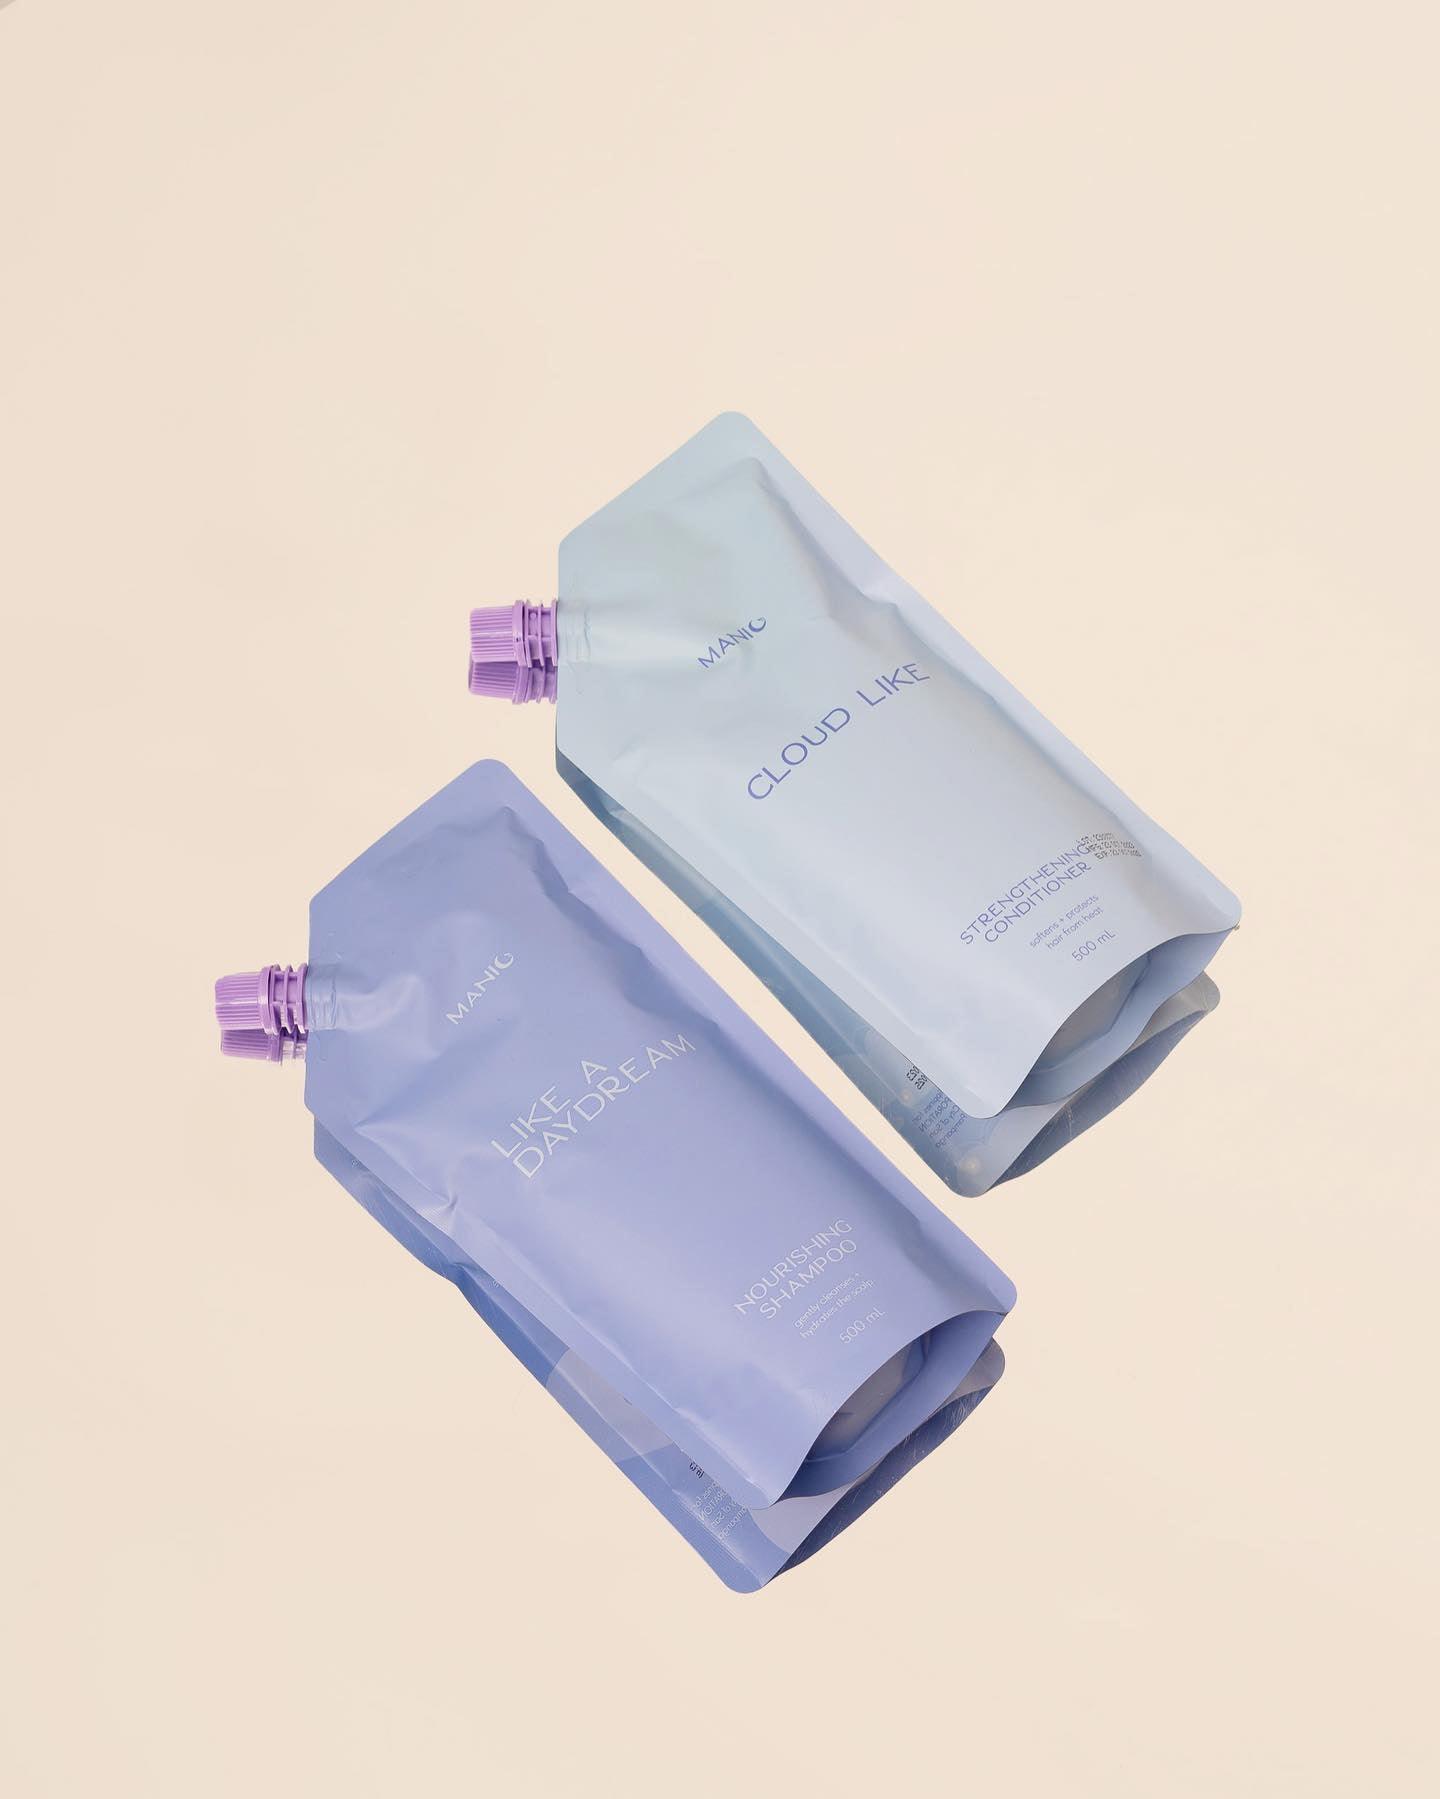 Manic Beauty Shampoo & Conditioner Refill Pack 500ml (PREORDER) - Astrid & Rose